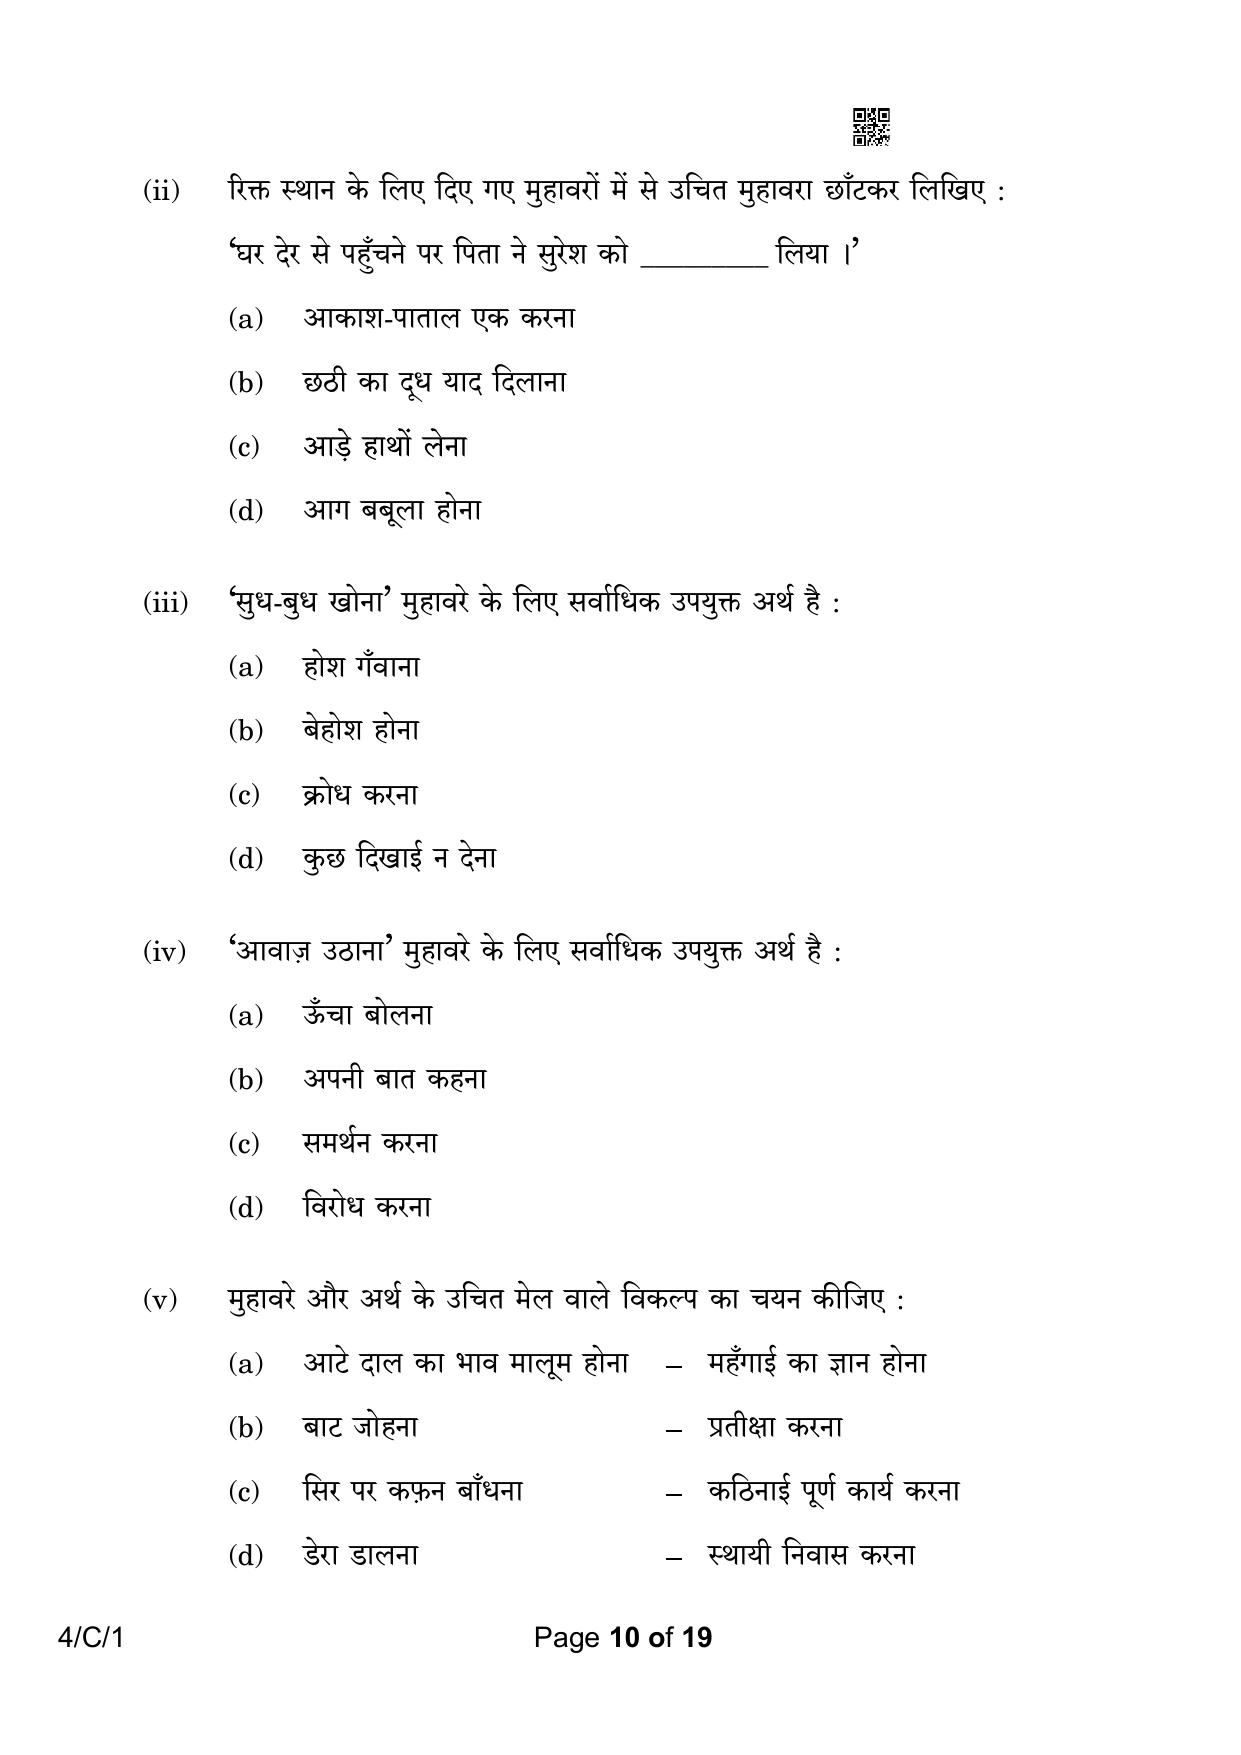 CBSE Class 10 4-1 Hindi B 2023 (Compartment) Question Paper - Page 10